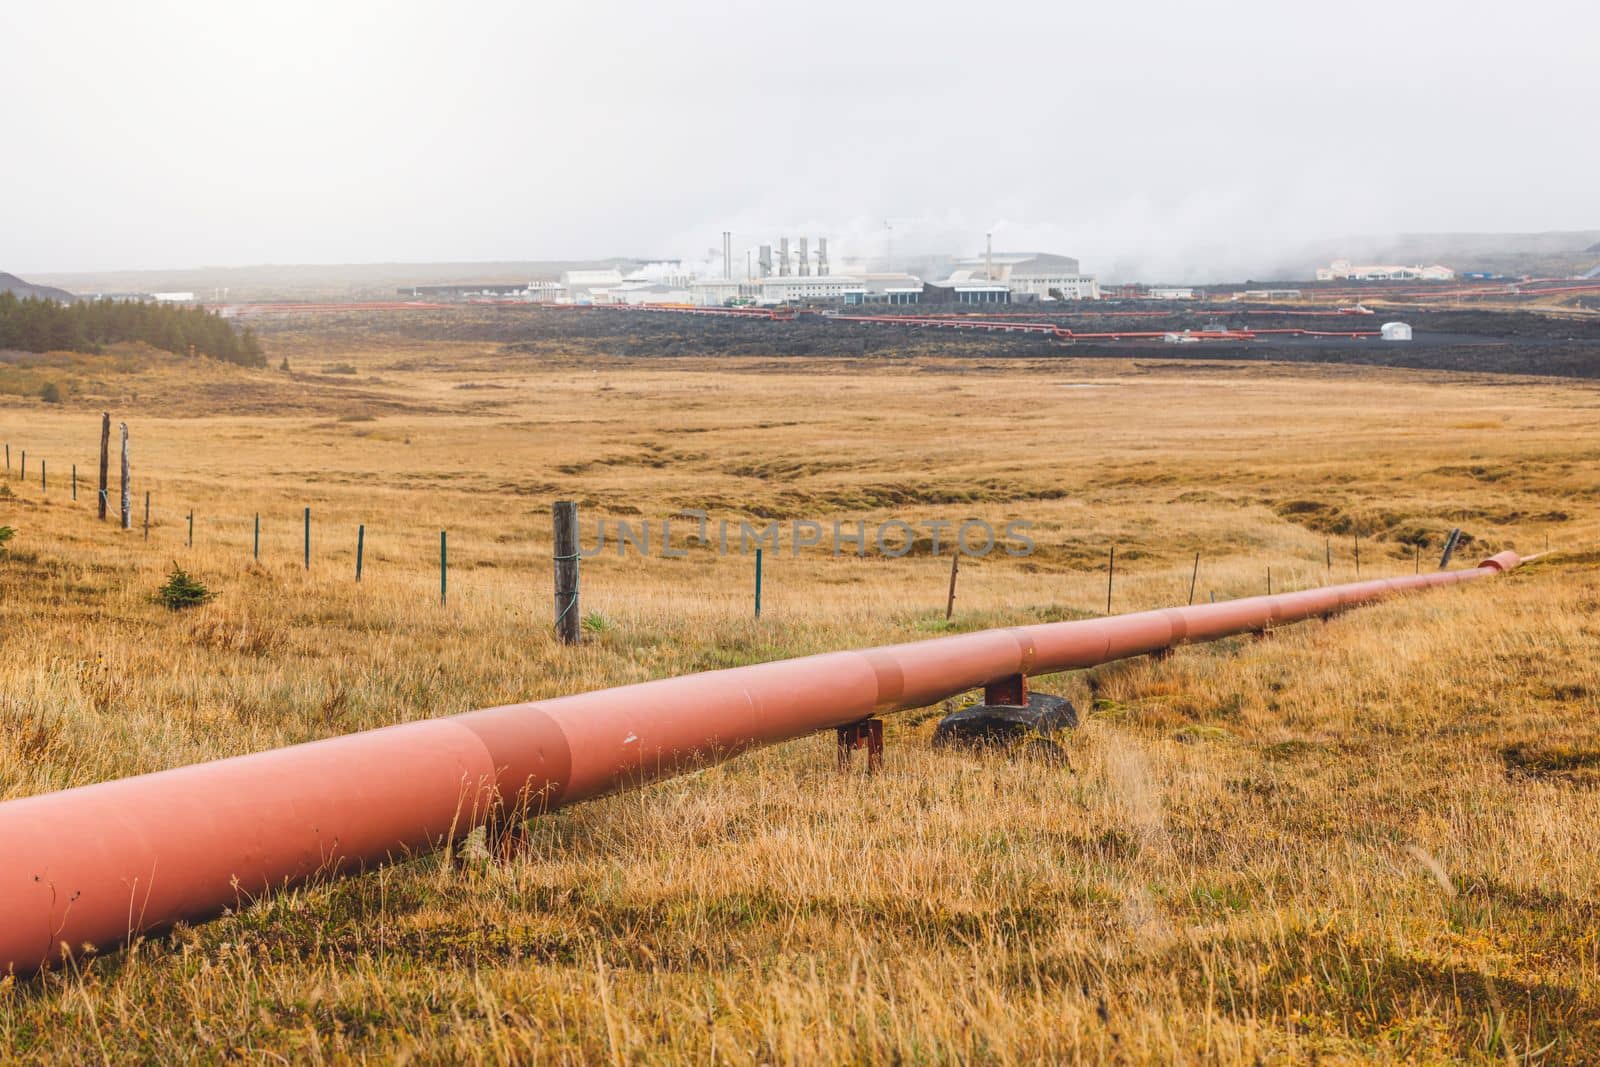 Geothermal Power Plant, hot water power station in Iceland. Steam rolling out of the plant chimneys, red large tubes running across the grounds filled with hot water. Sustainable, energy efficient Cloudy cold autumn day in Iceland.